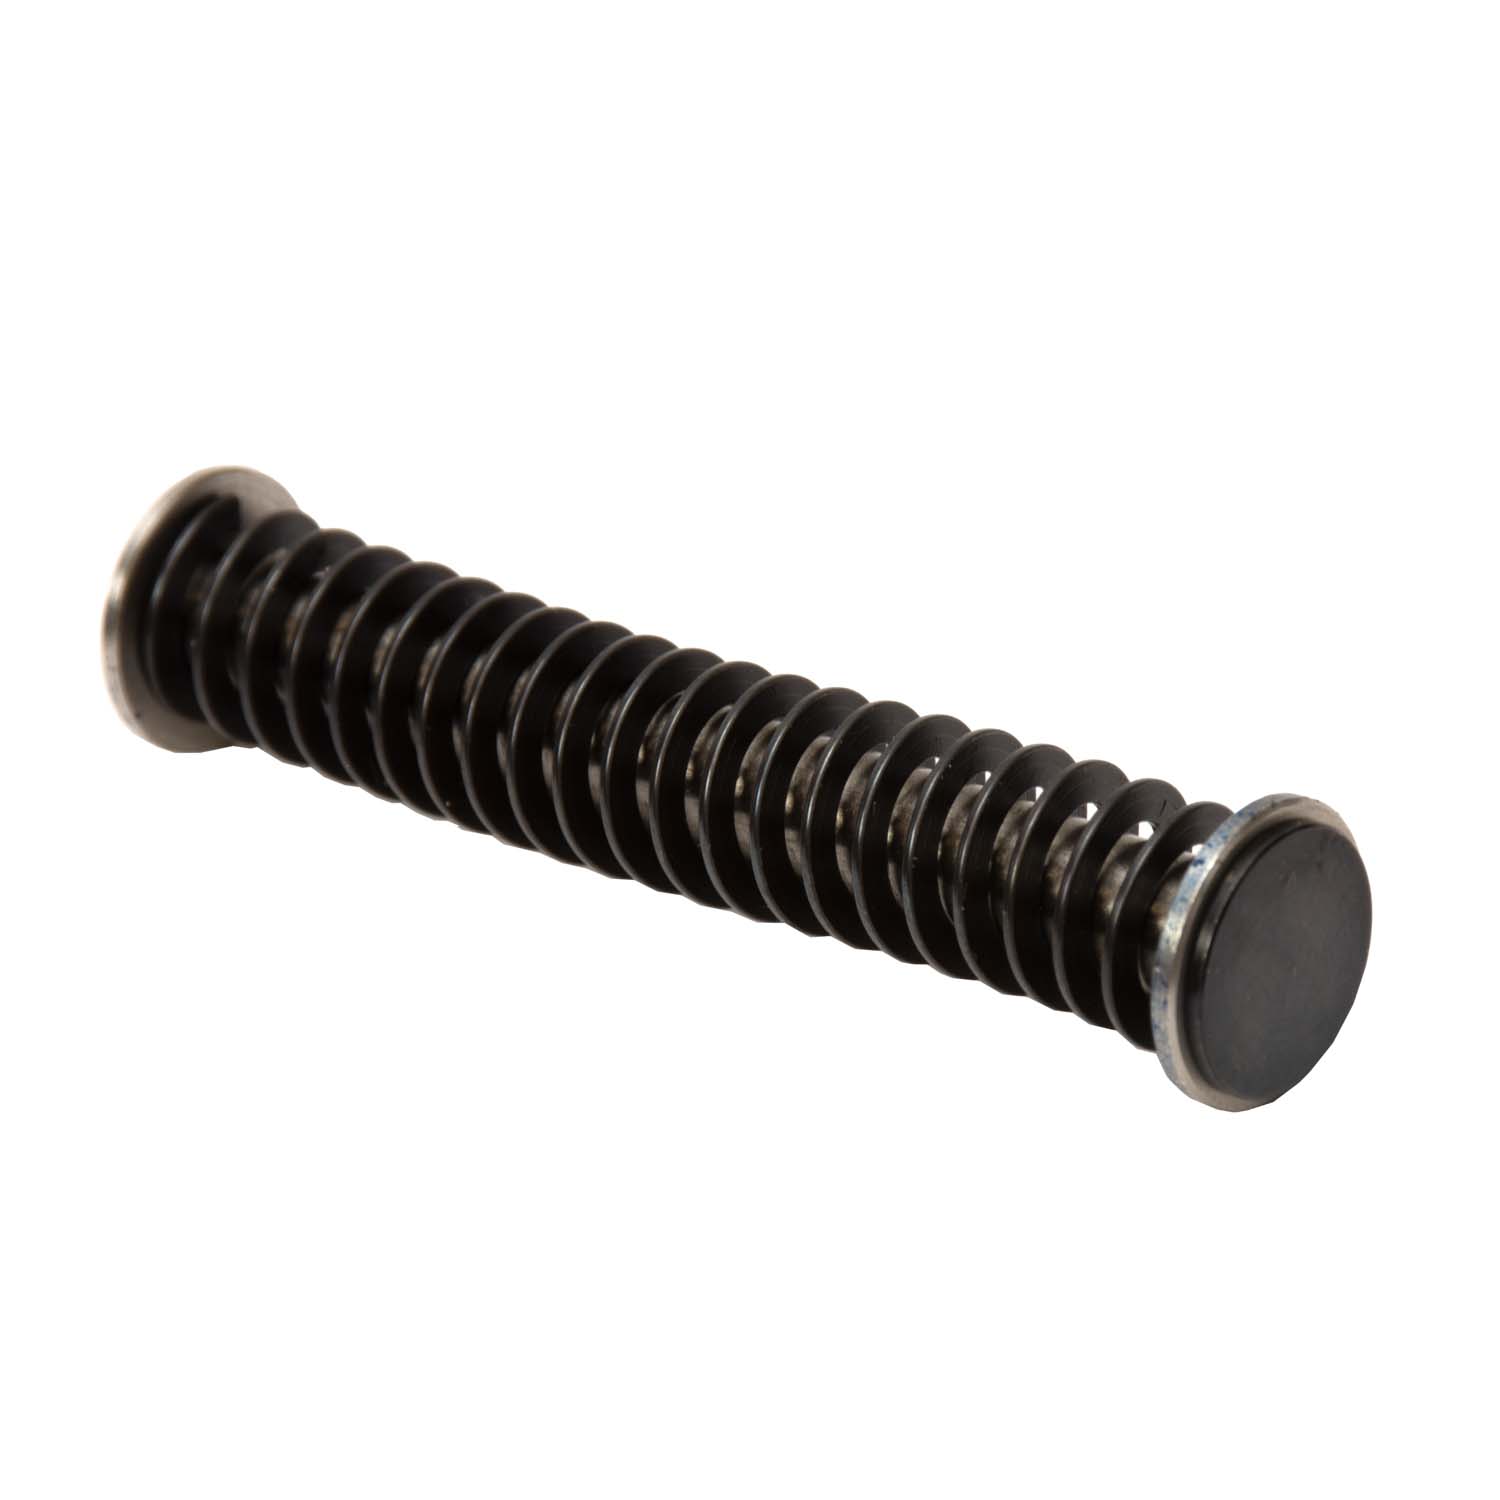 Rival Arms Springfield Hellcat Recoil Spring/Guide Rod Assembly, Stainless  Steel: MGW